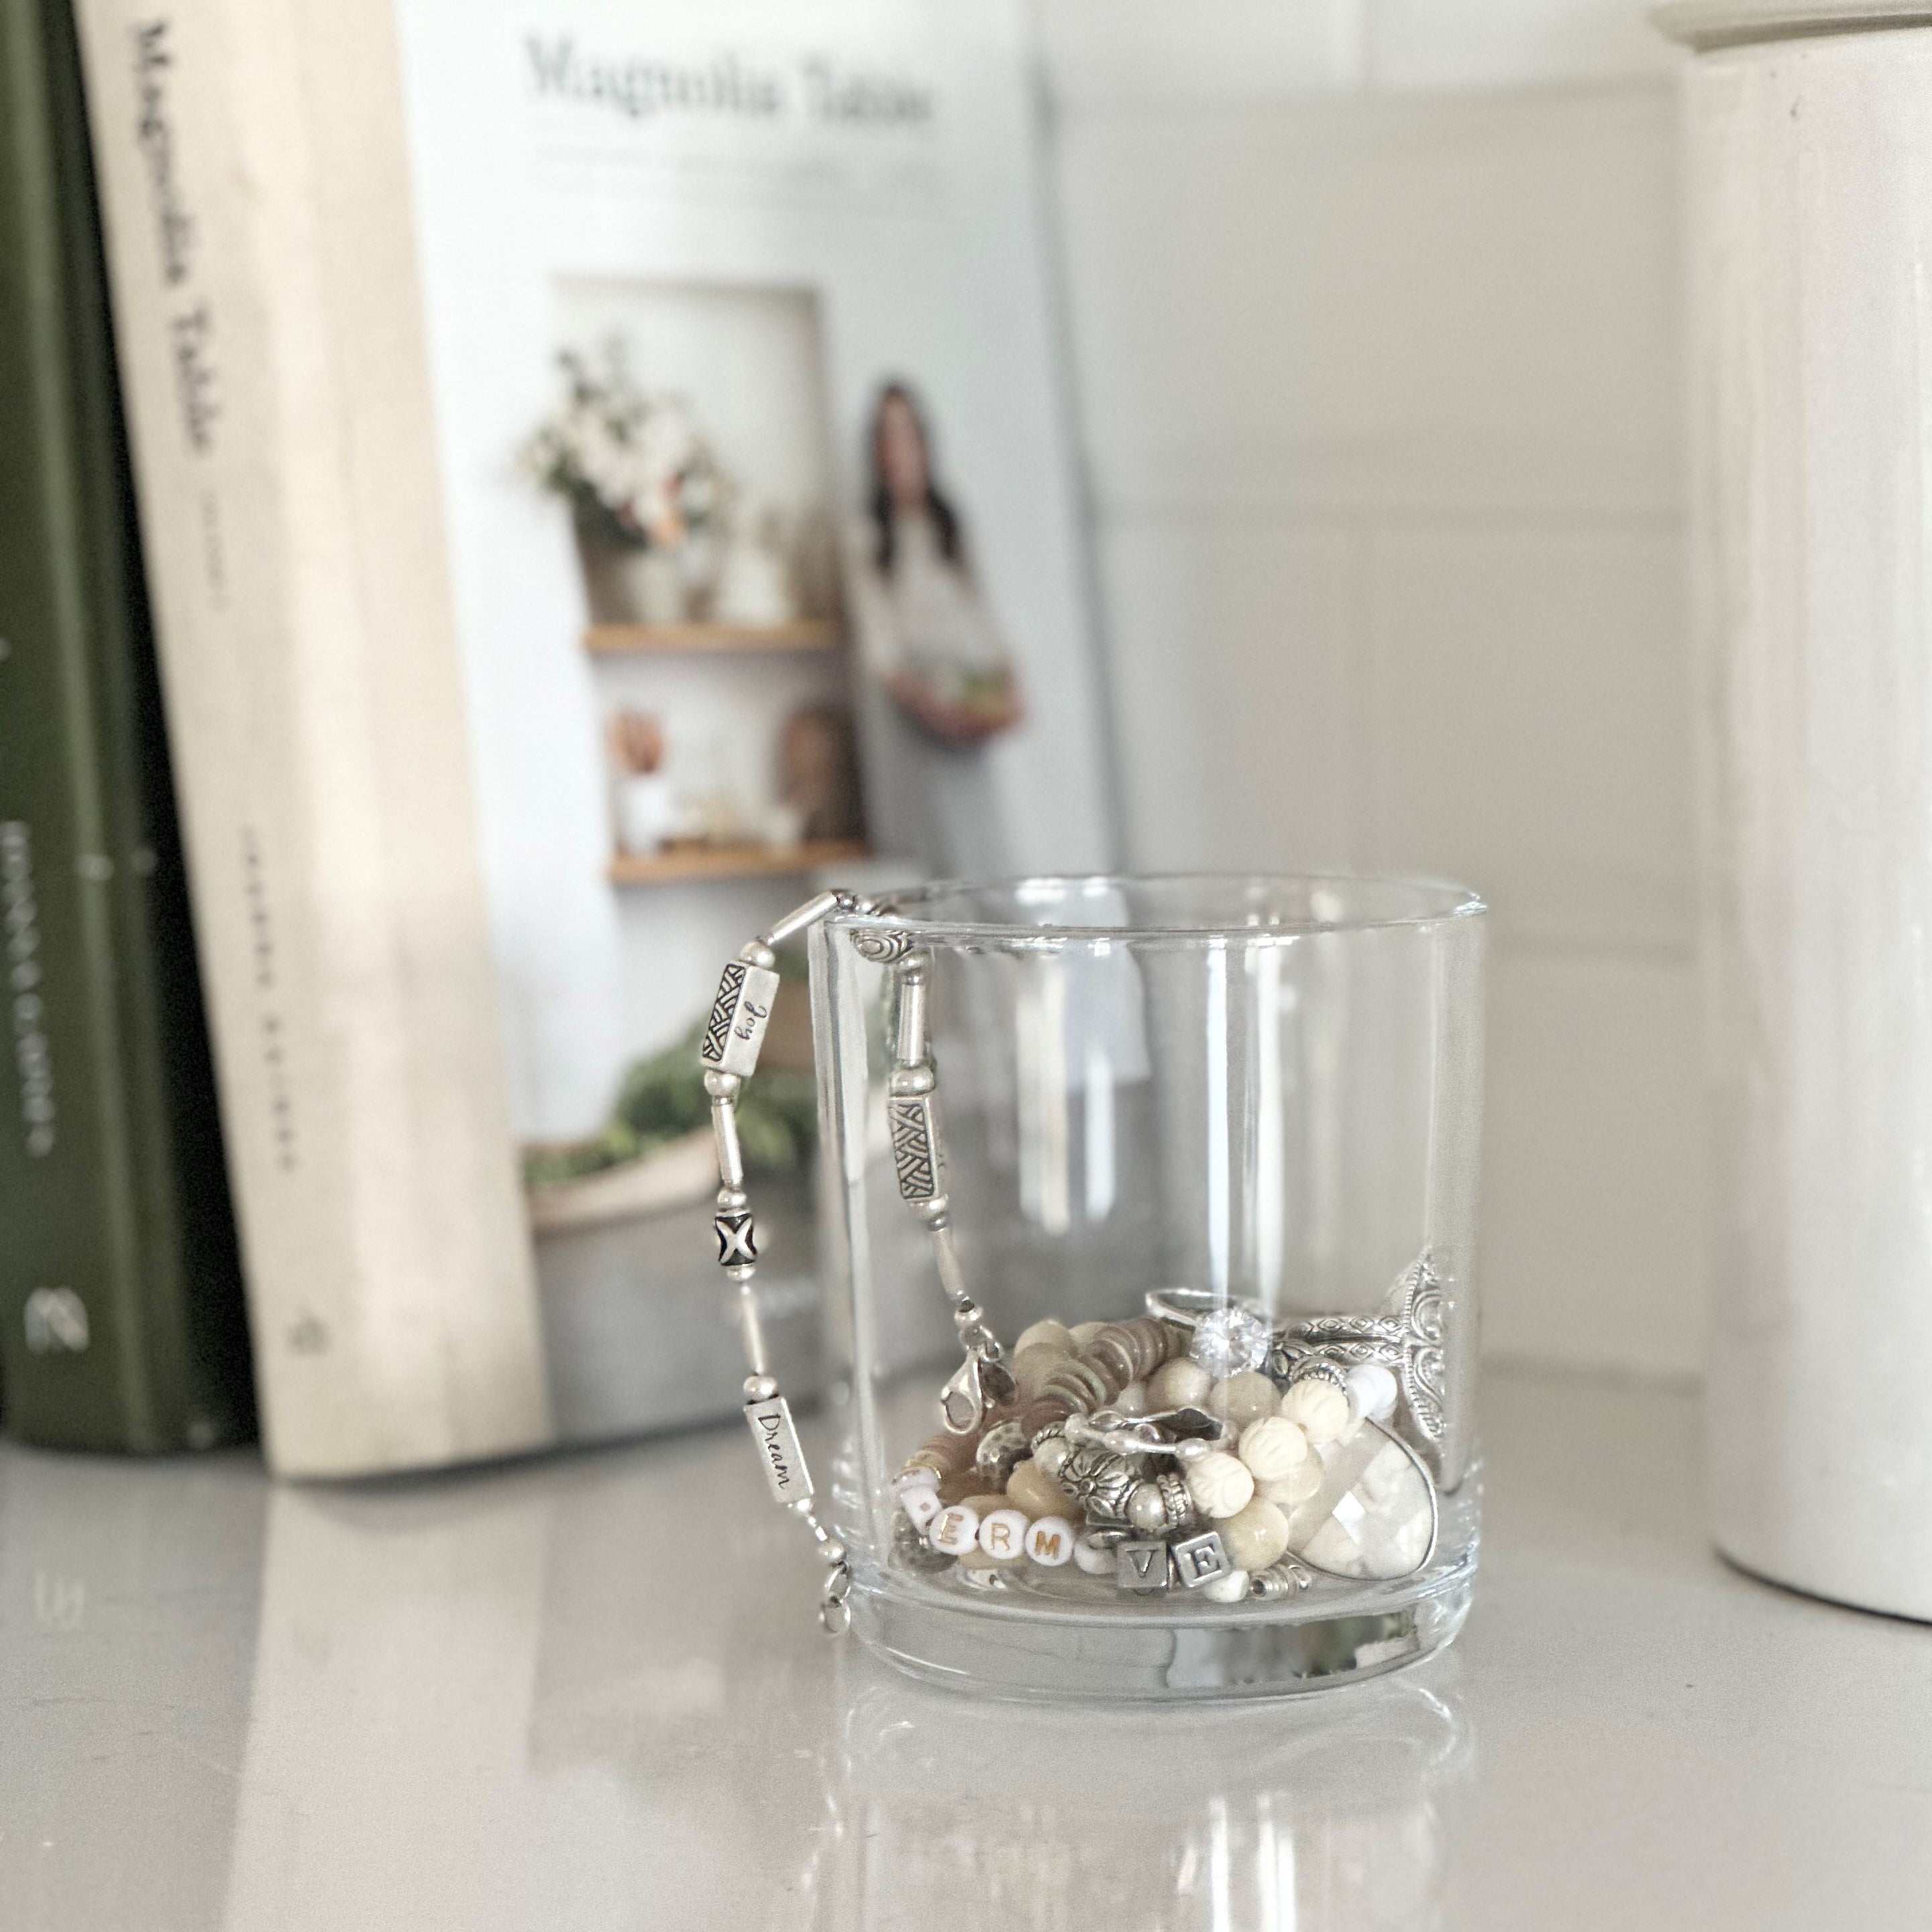 A glass cup overfilled with various charms and beads, sitting on a white shelf next to a row of books, creating a serene and aesthetic vignette.